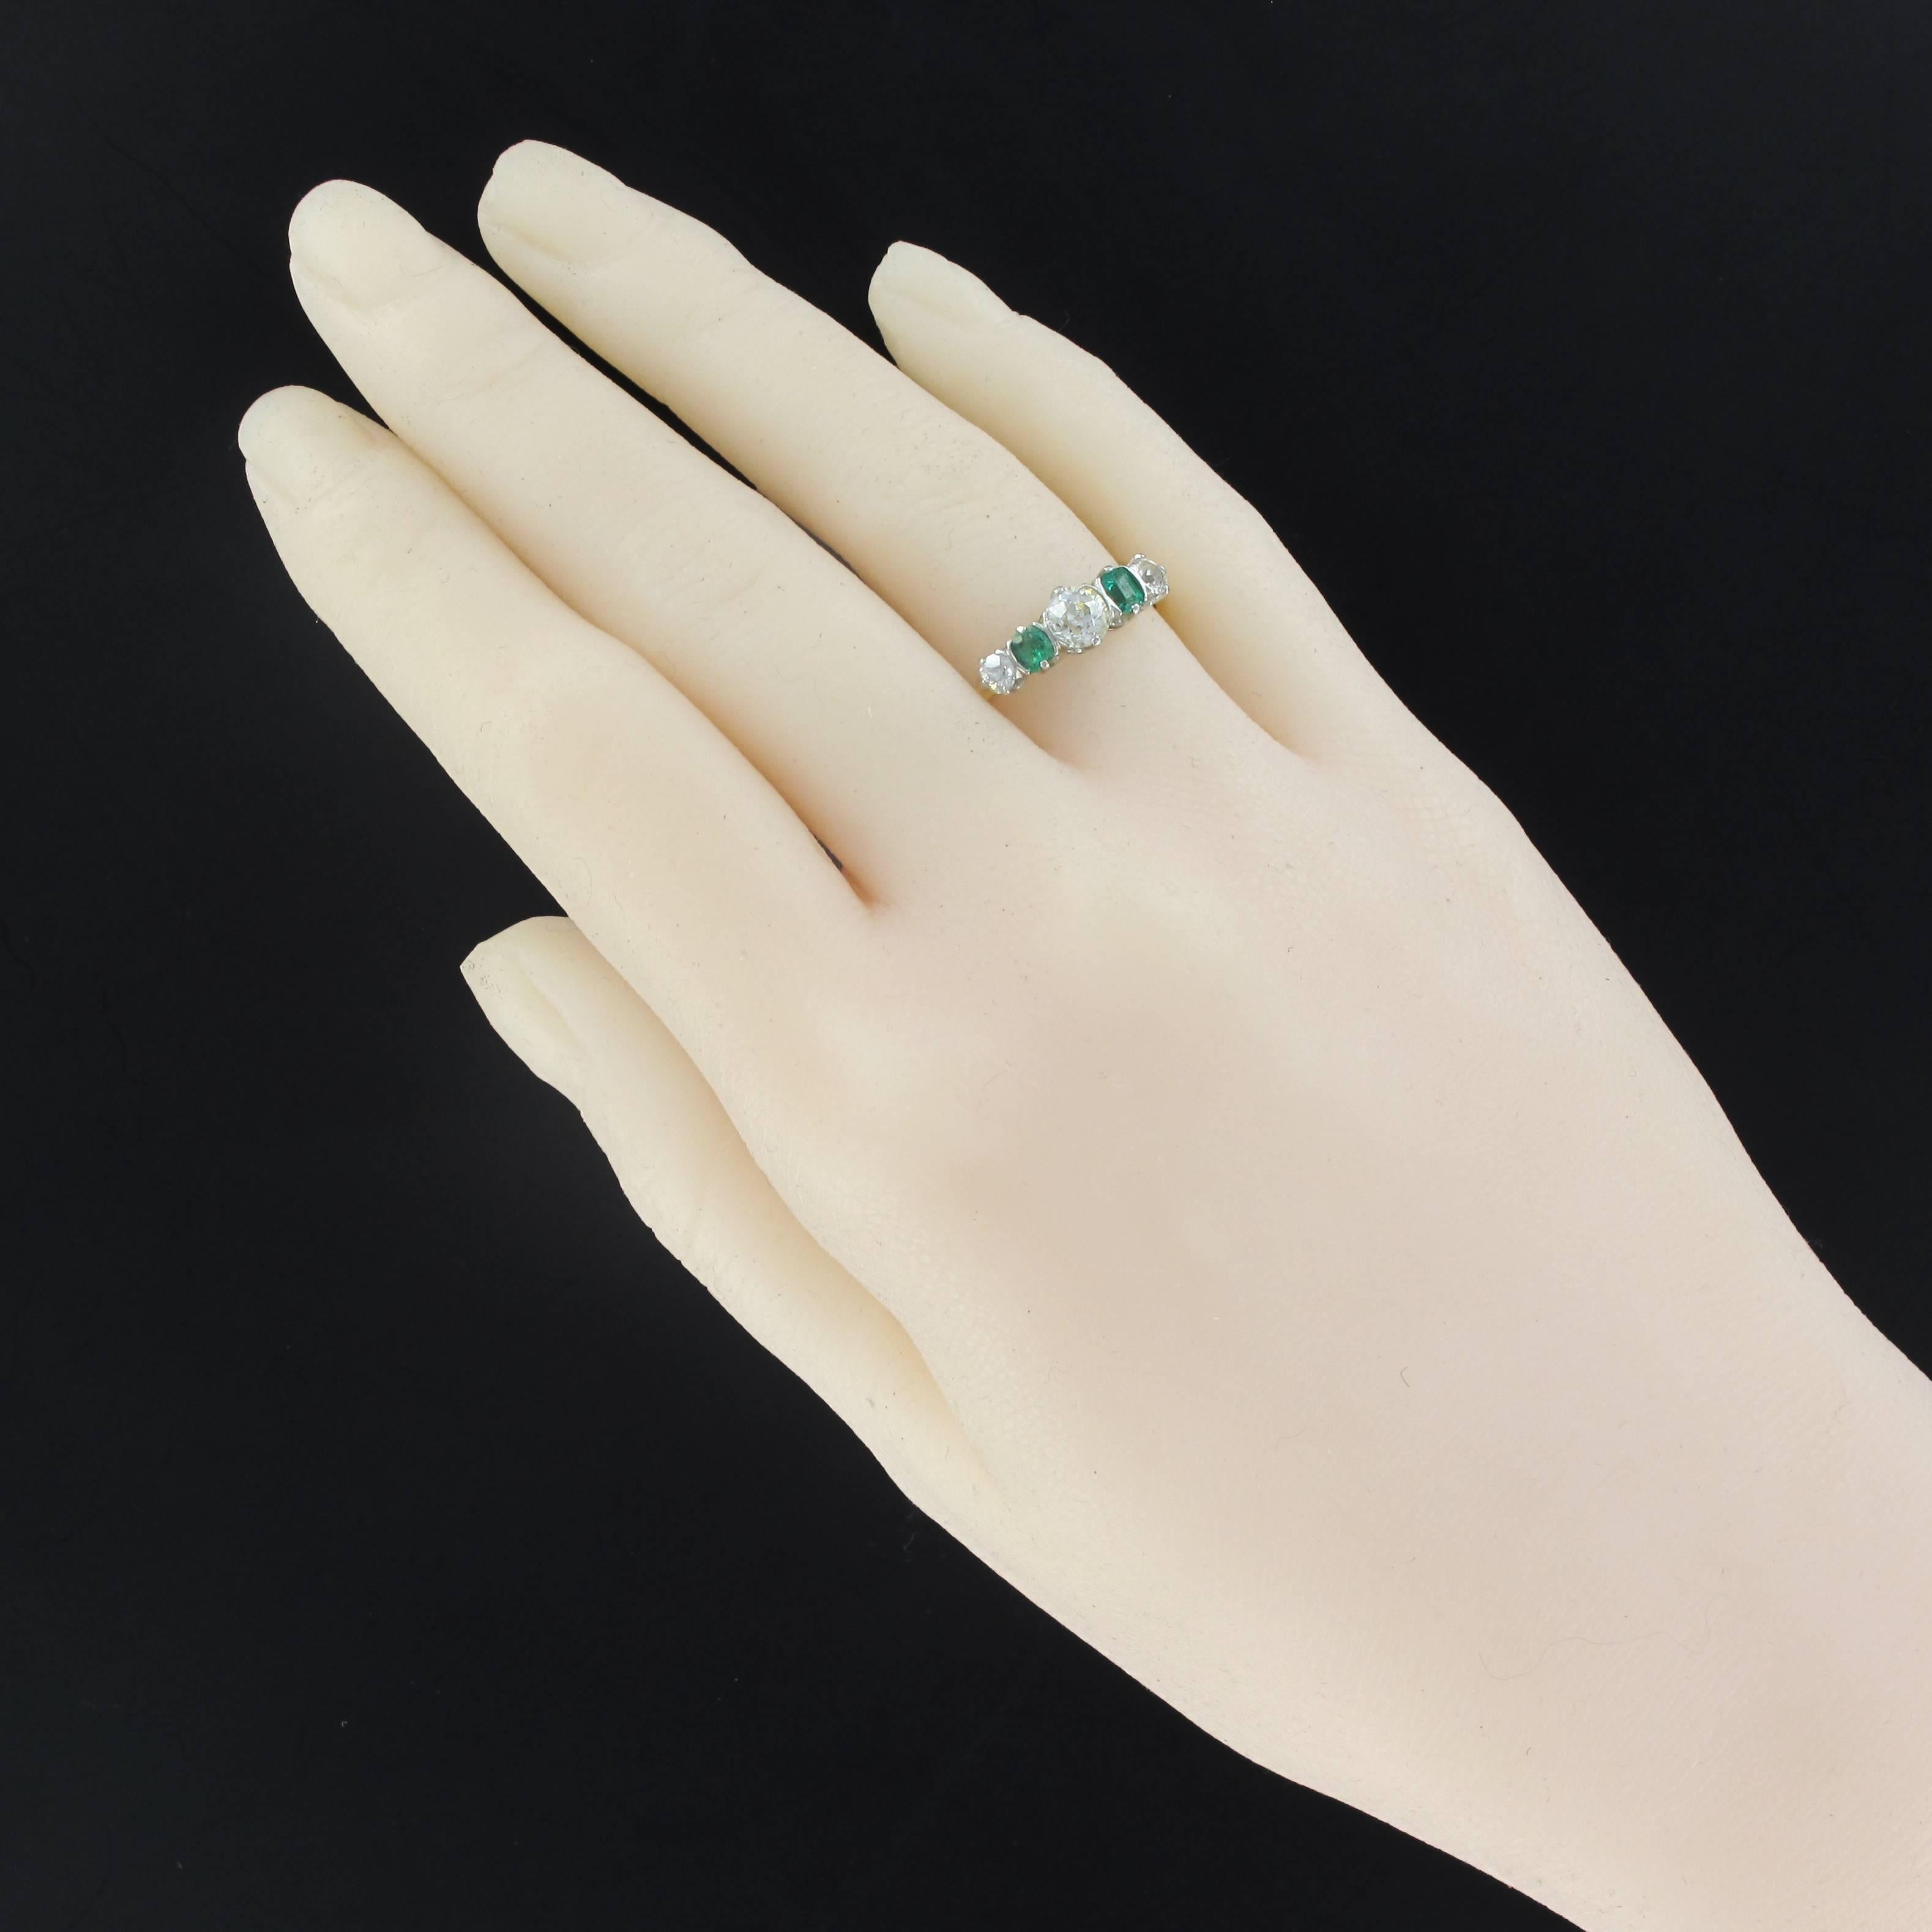 Ring in 18 carats yellow gold and white gold, 750 thousandths.
This charming antique ring is set with claws of an antique brilliant cut diamond supported on both sides of 2 emerald set with claws each shoulder of an antique brilliant cut